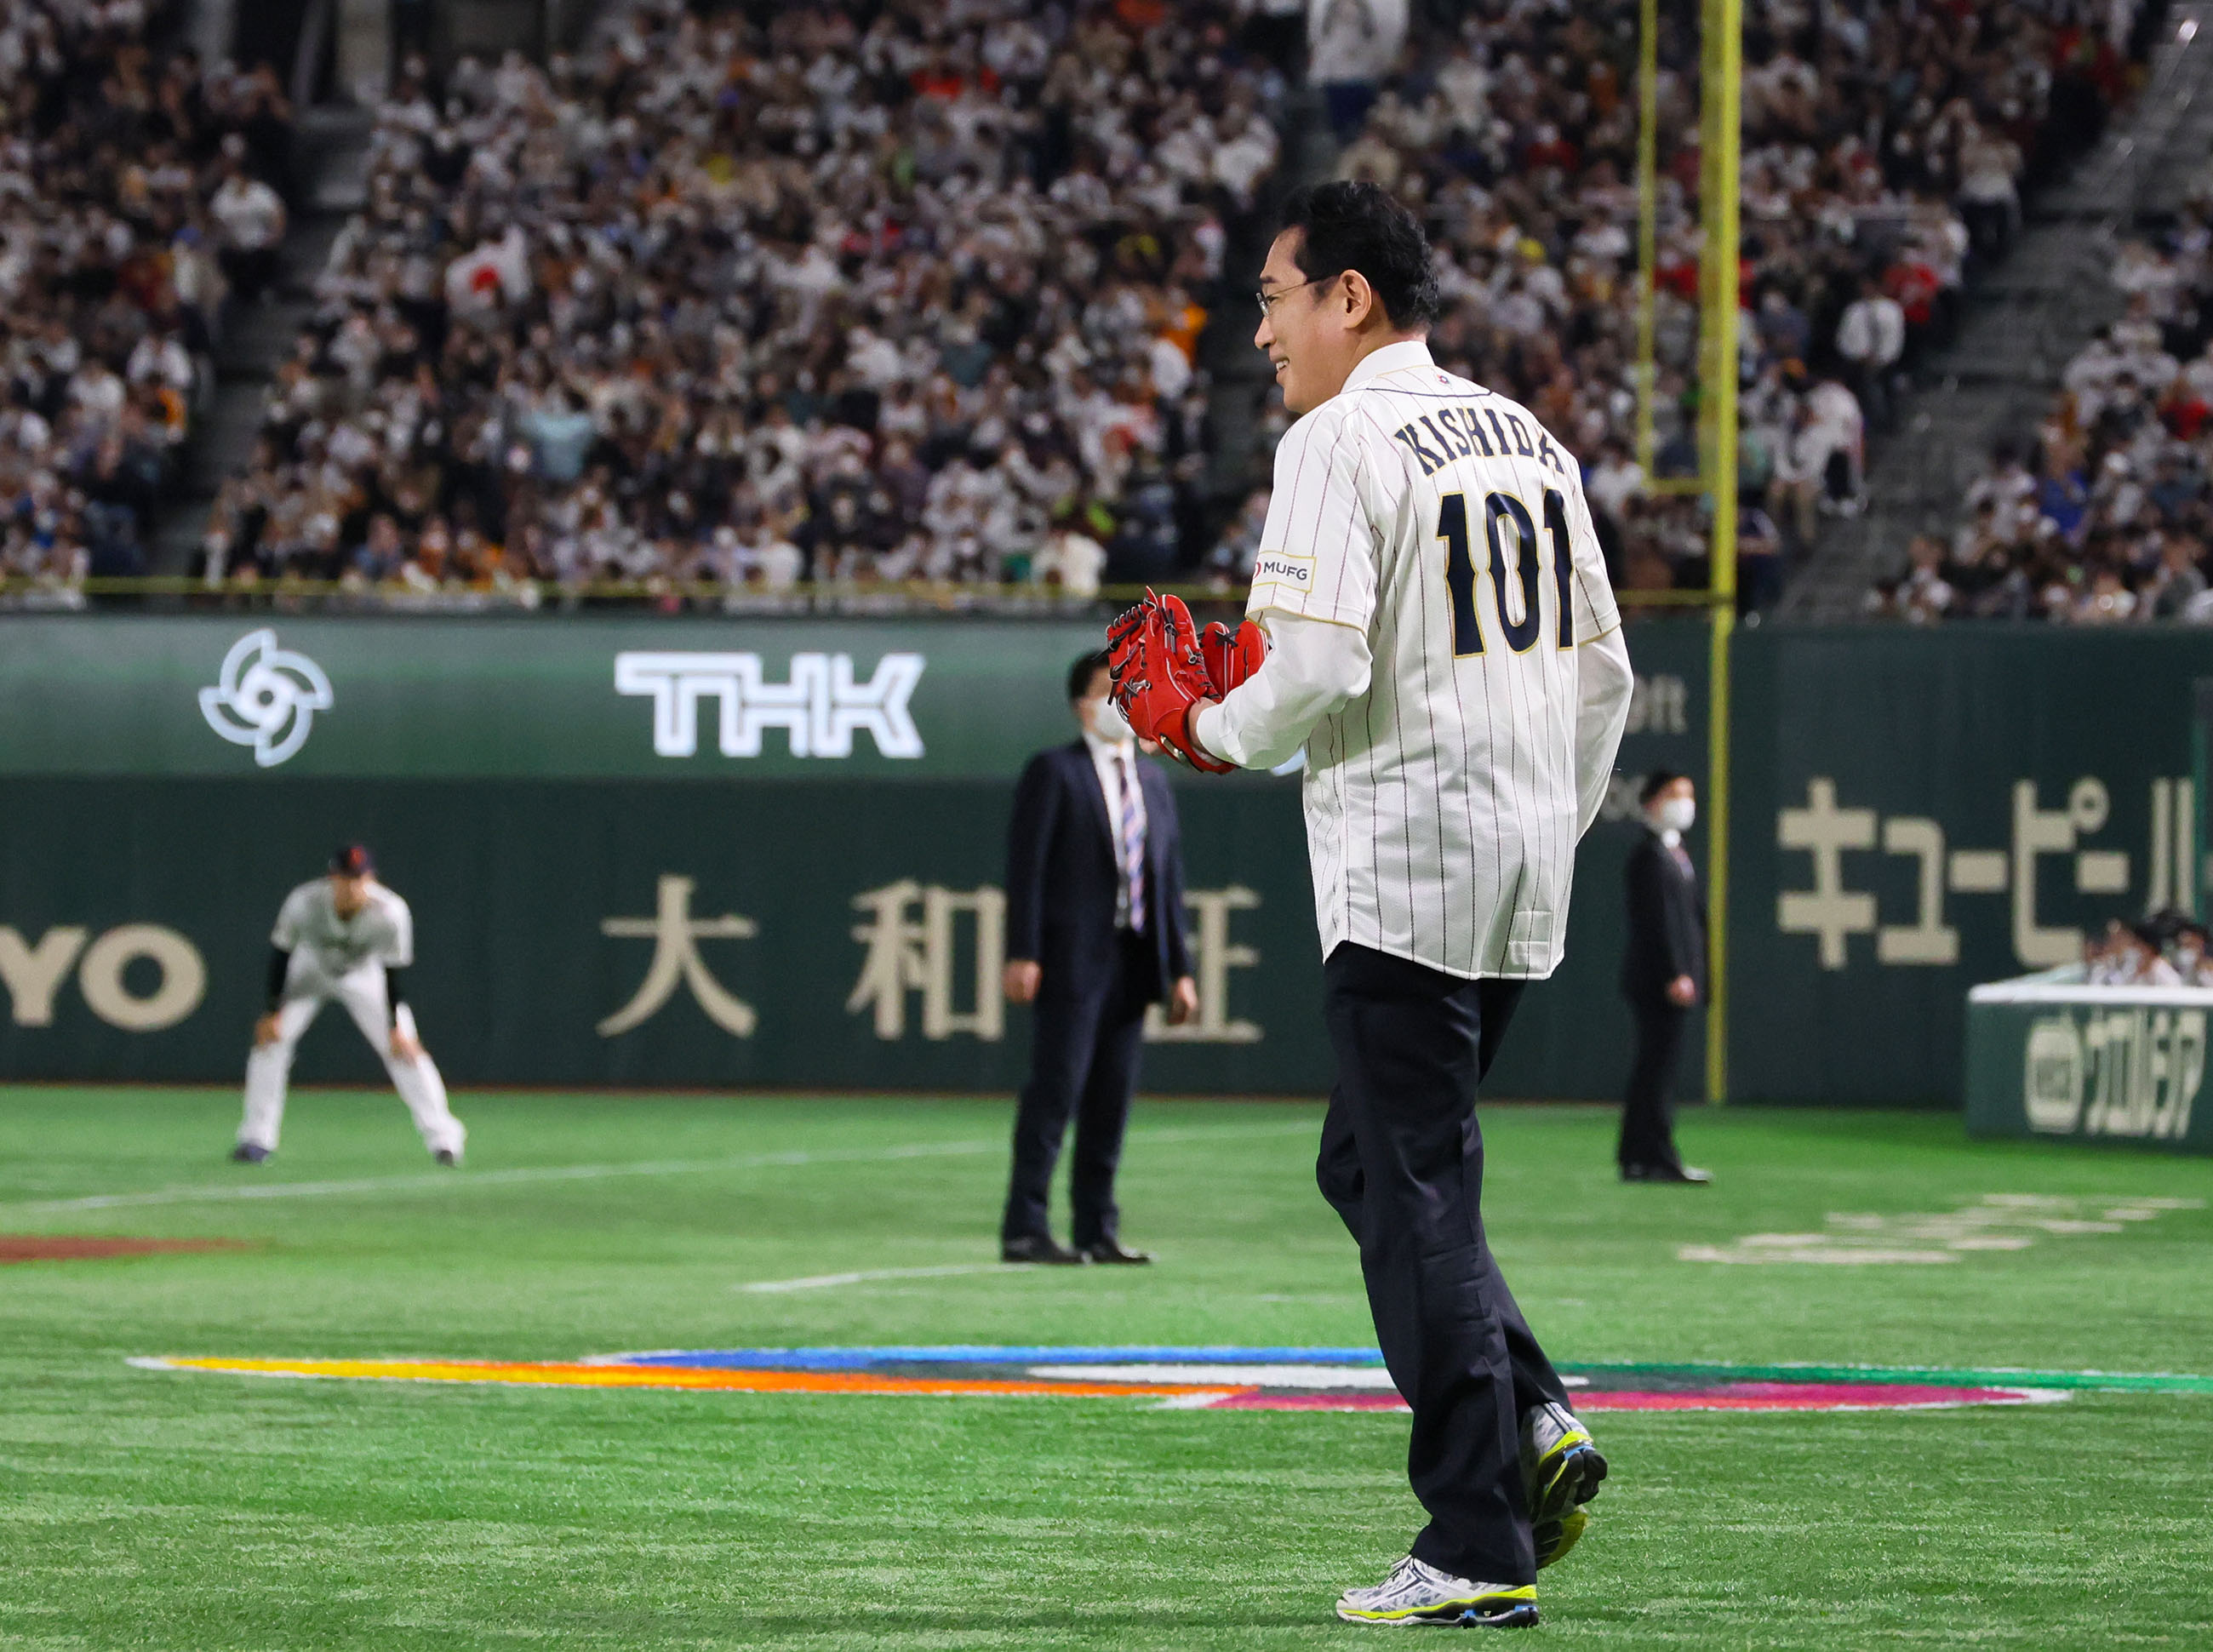 Ceremonial First Pitch for the 2023 World Baseball Classic